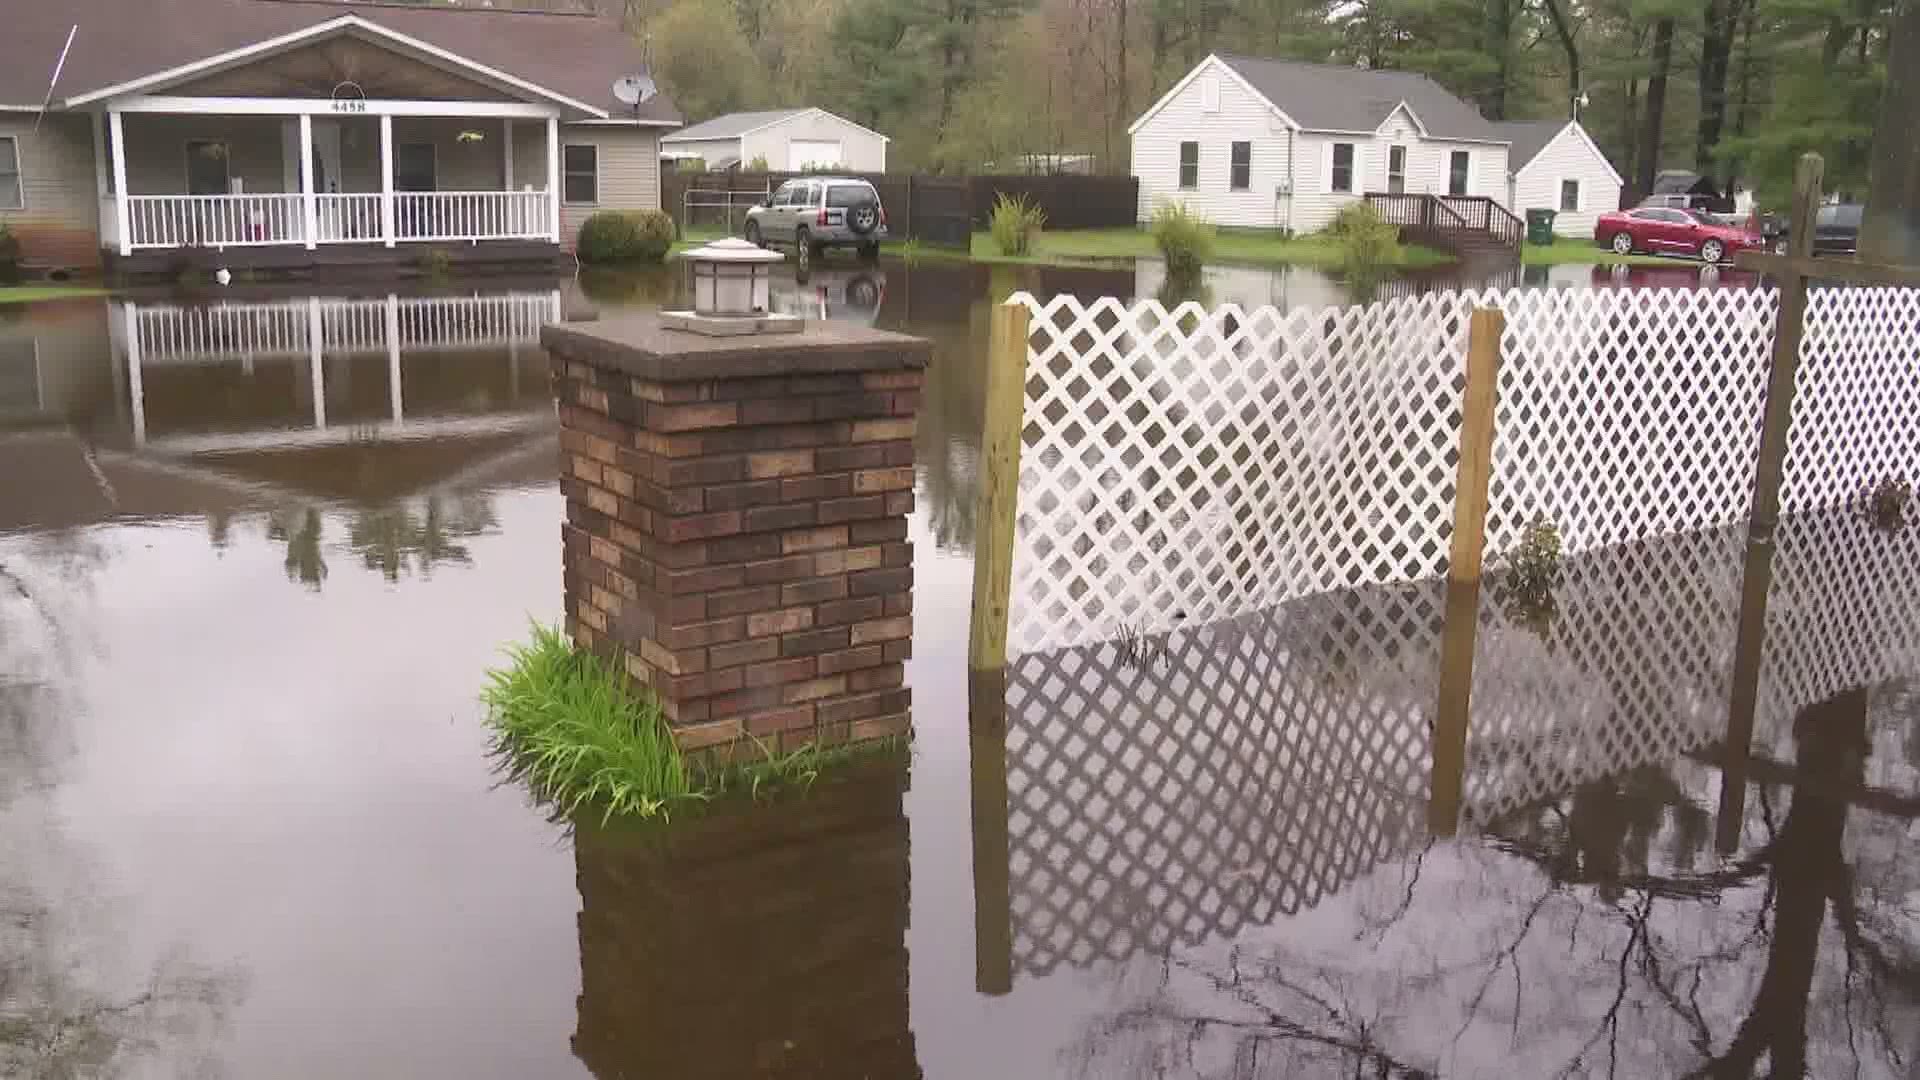 There is still flooding of roads, basements and homes in low lying areas.